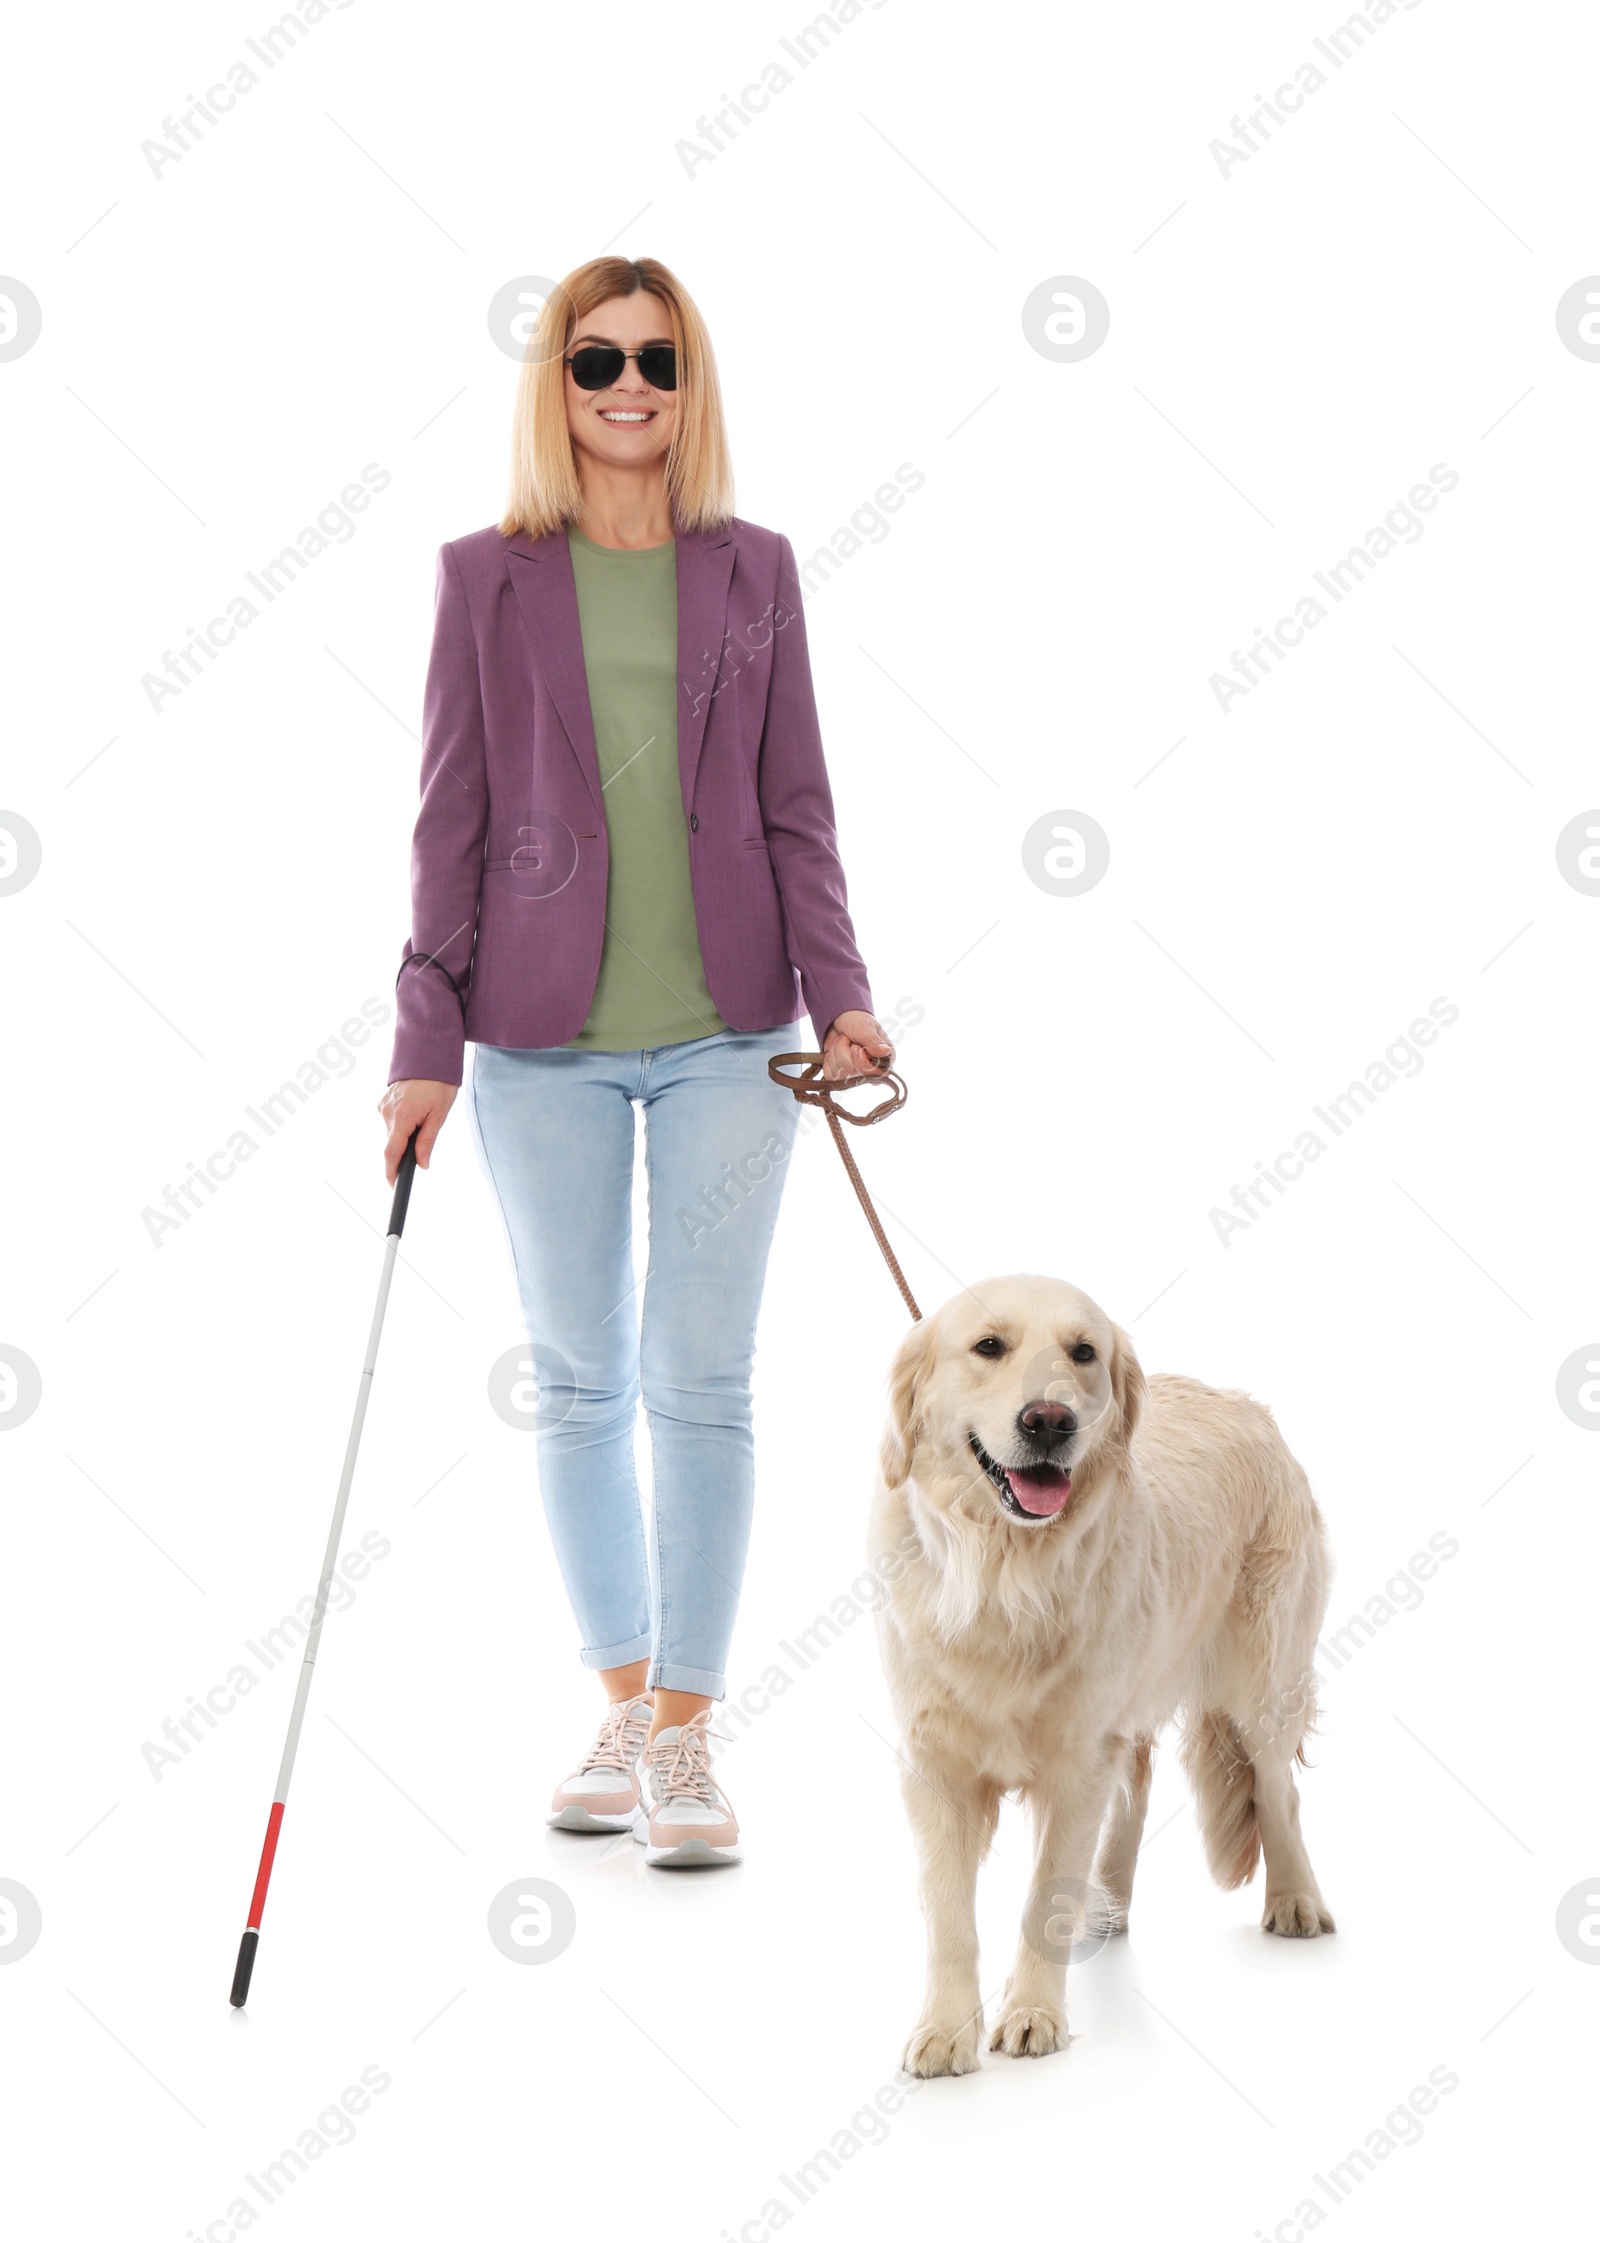 Photo of Blind person with long cane and guide dog on white background